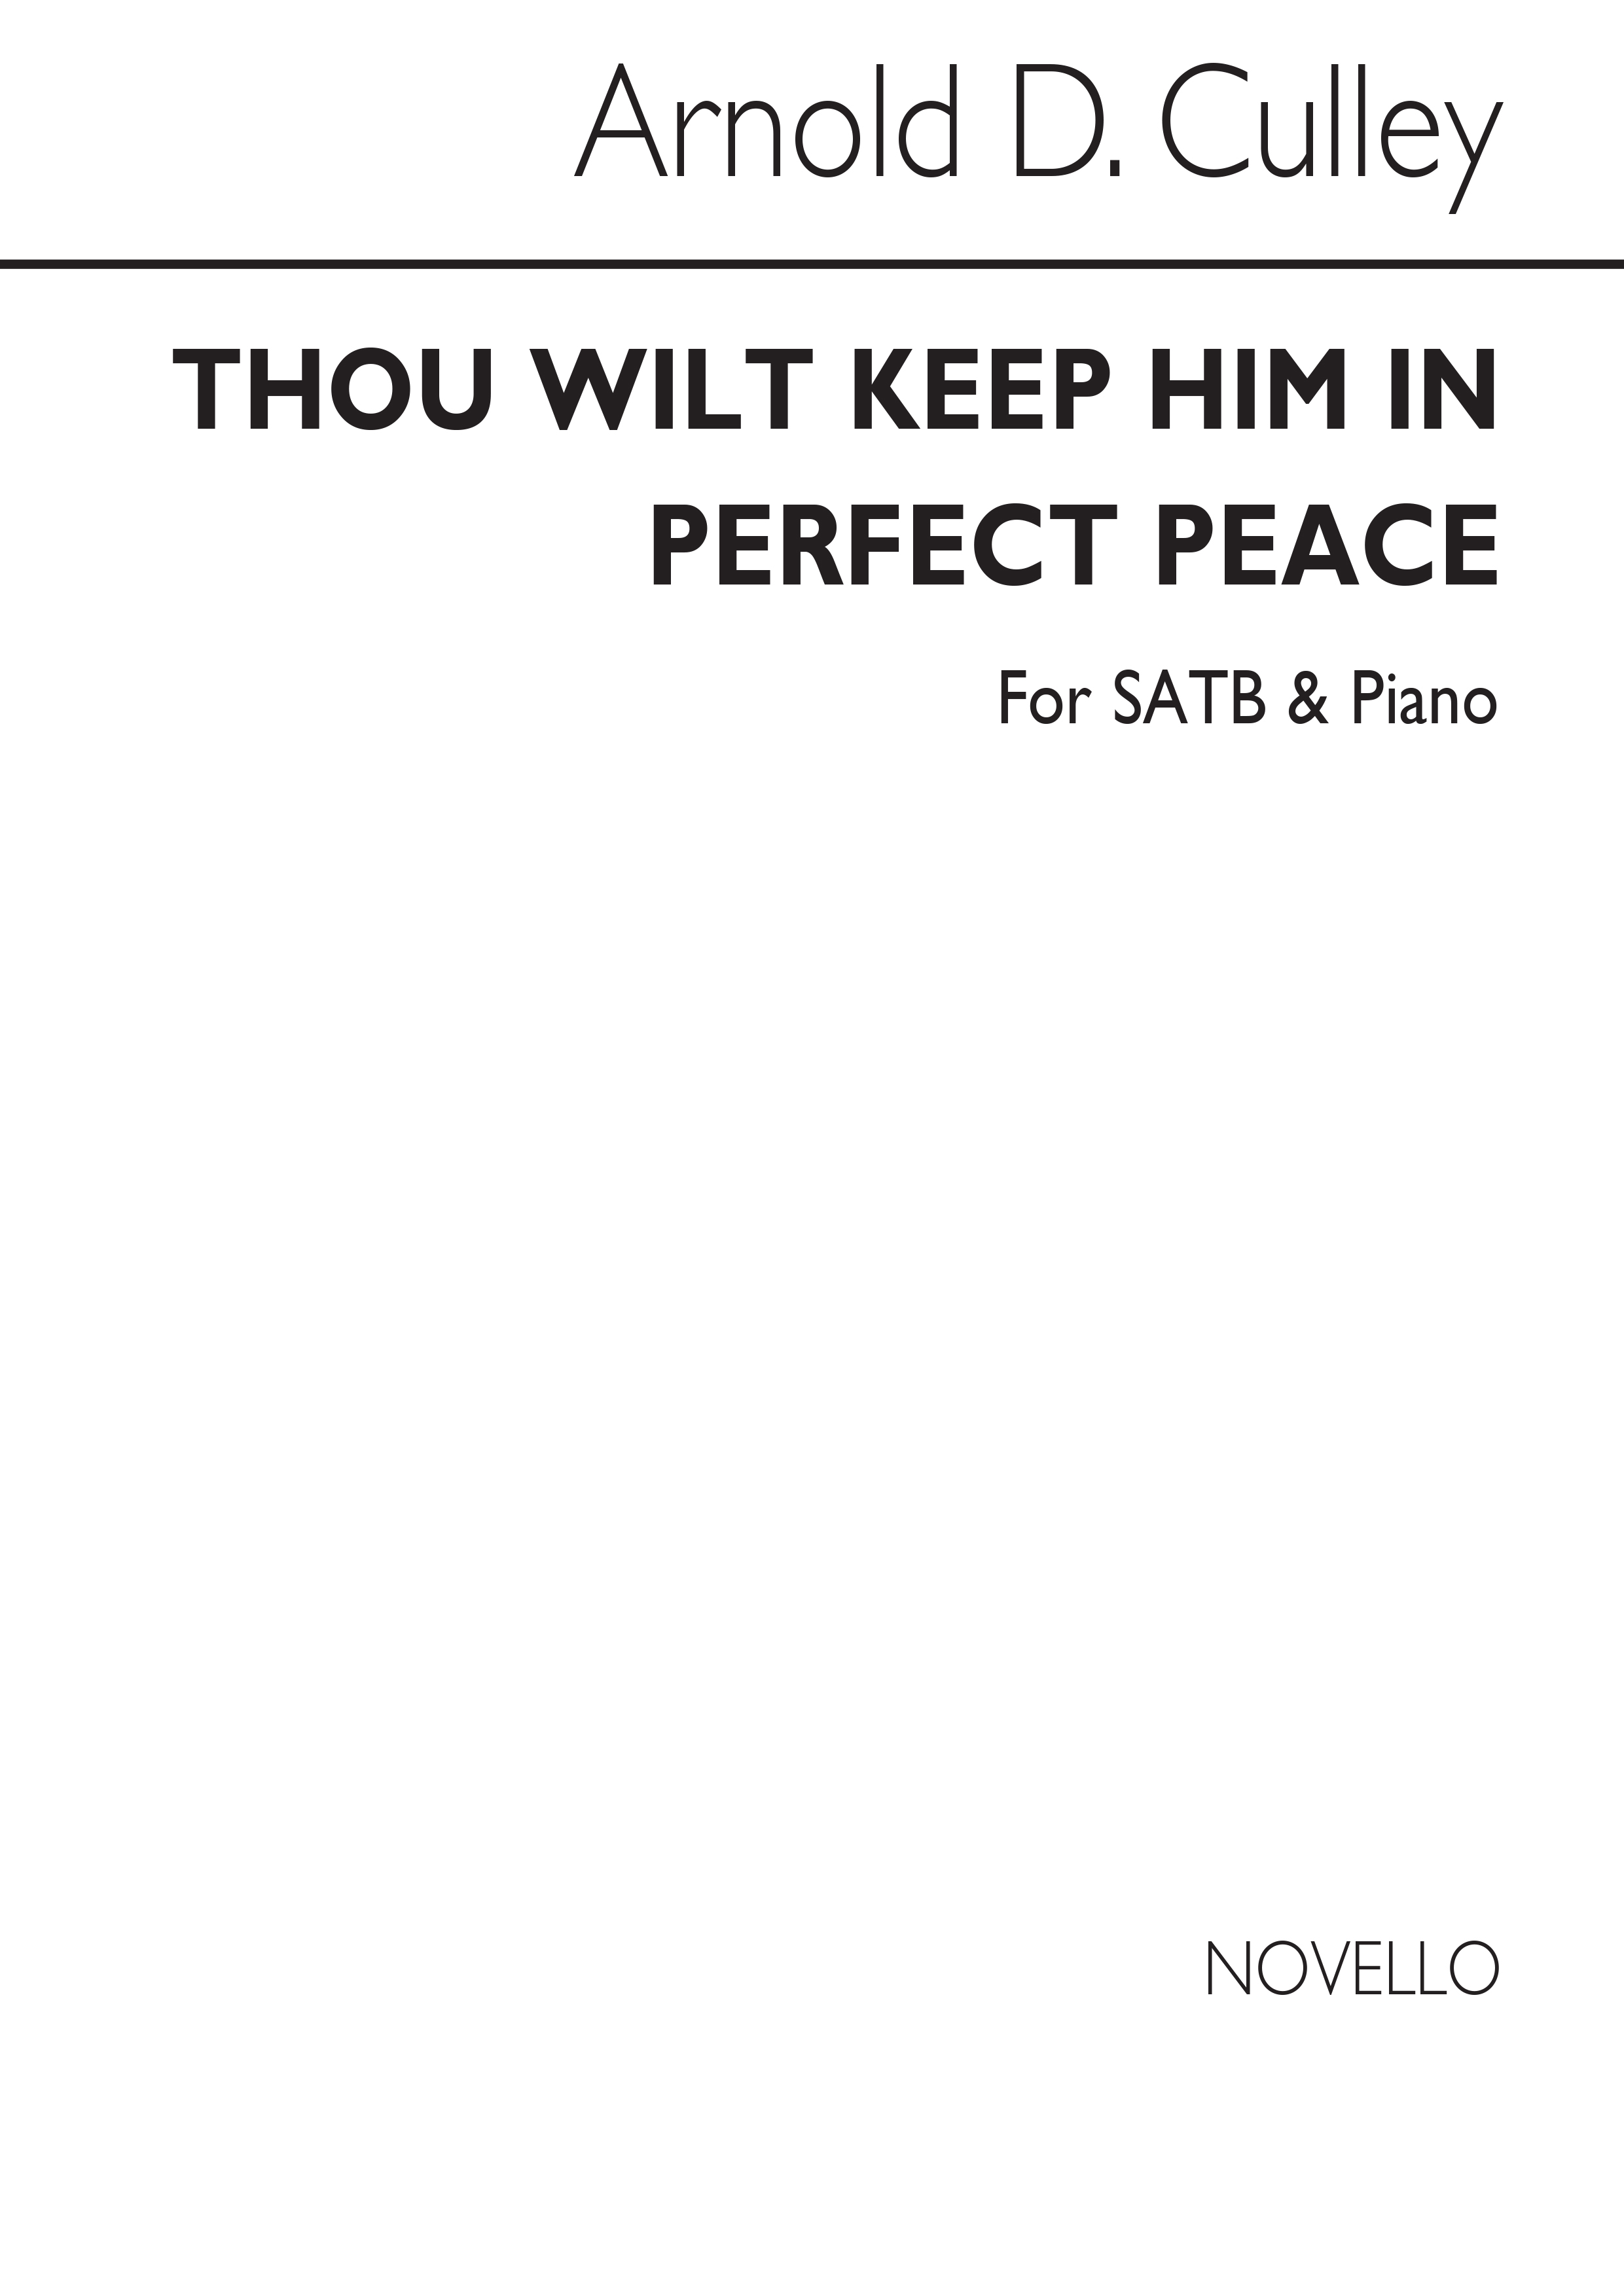 Arnold D.. Culley: Thou Wilt Keep Him In Perfect Peace Satb/Organ